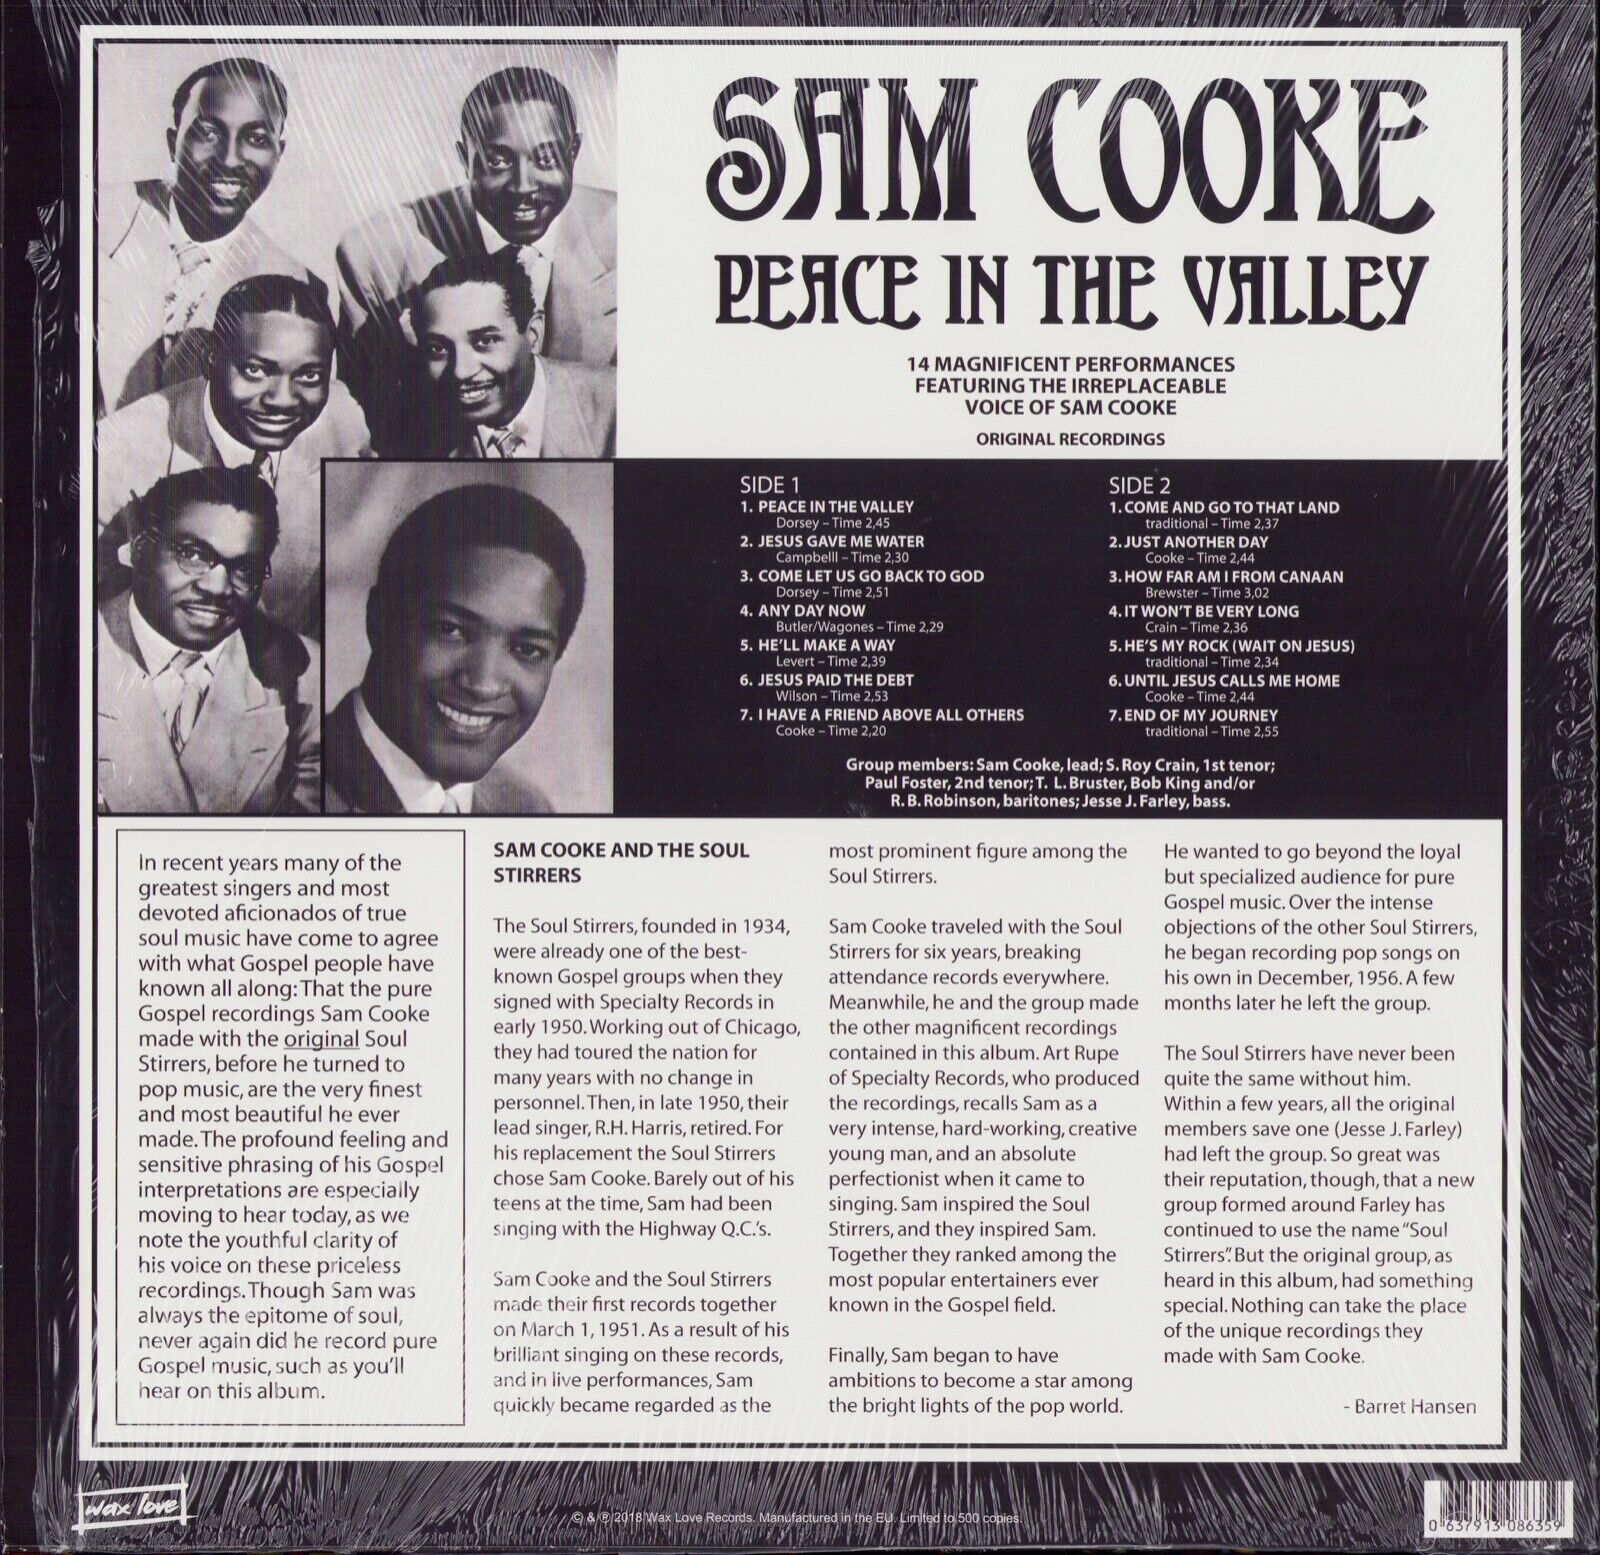 Sam Cooke ‎- Peace In The Valley Vinyl LP Limited Edition